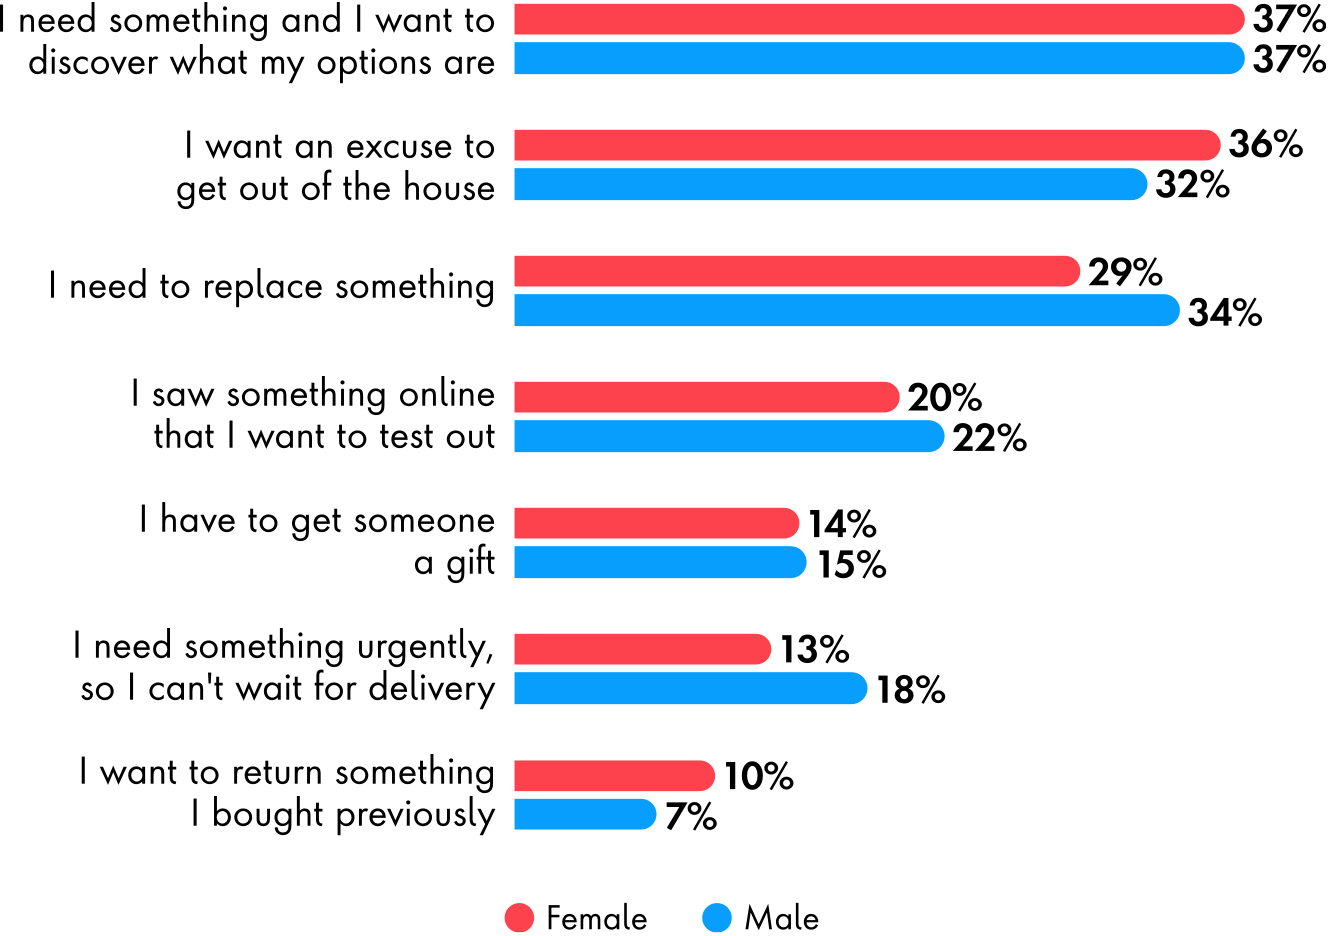 On average, 37% are looking to discover products and 34% looking to get out of their homes to shop.